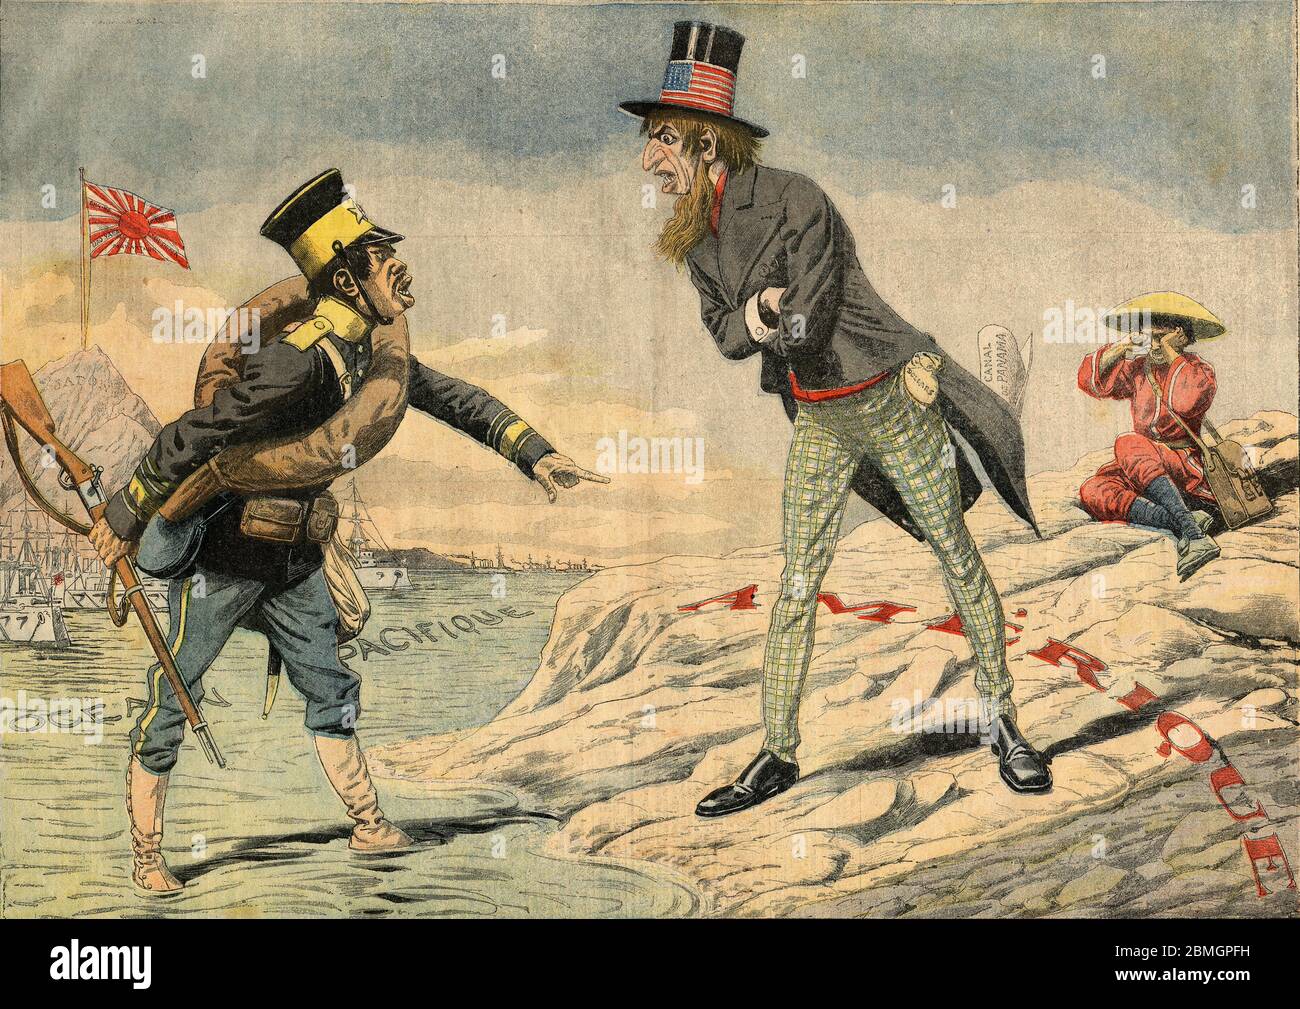 [ 1900s Japan - US-Japan Diplomatic Crisis in 1906 ] —   Caricature of the diplomatic crisis between Japan and the United States after the San Francisco Board of Education in 1906 (Meiji 39) enacted a measure to send Japanese and Chinese children to segregated schools. This violated a US-Japanese treaty signed in 1894 (Meiji 27).  Illustration published in the prominent French newspaper Le Petit Parisien on December 16, 1906 (Meiji 39). The original caption said, 'Blanc Contras Jaunes' (White against Yellow).  20th century vintage newspaper illustration. Stock Photo